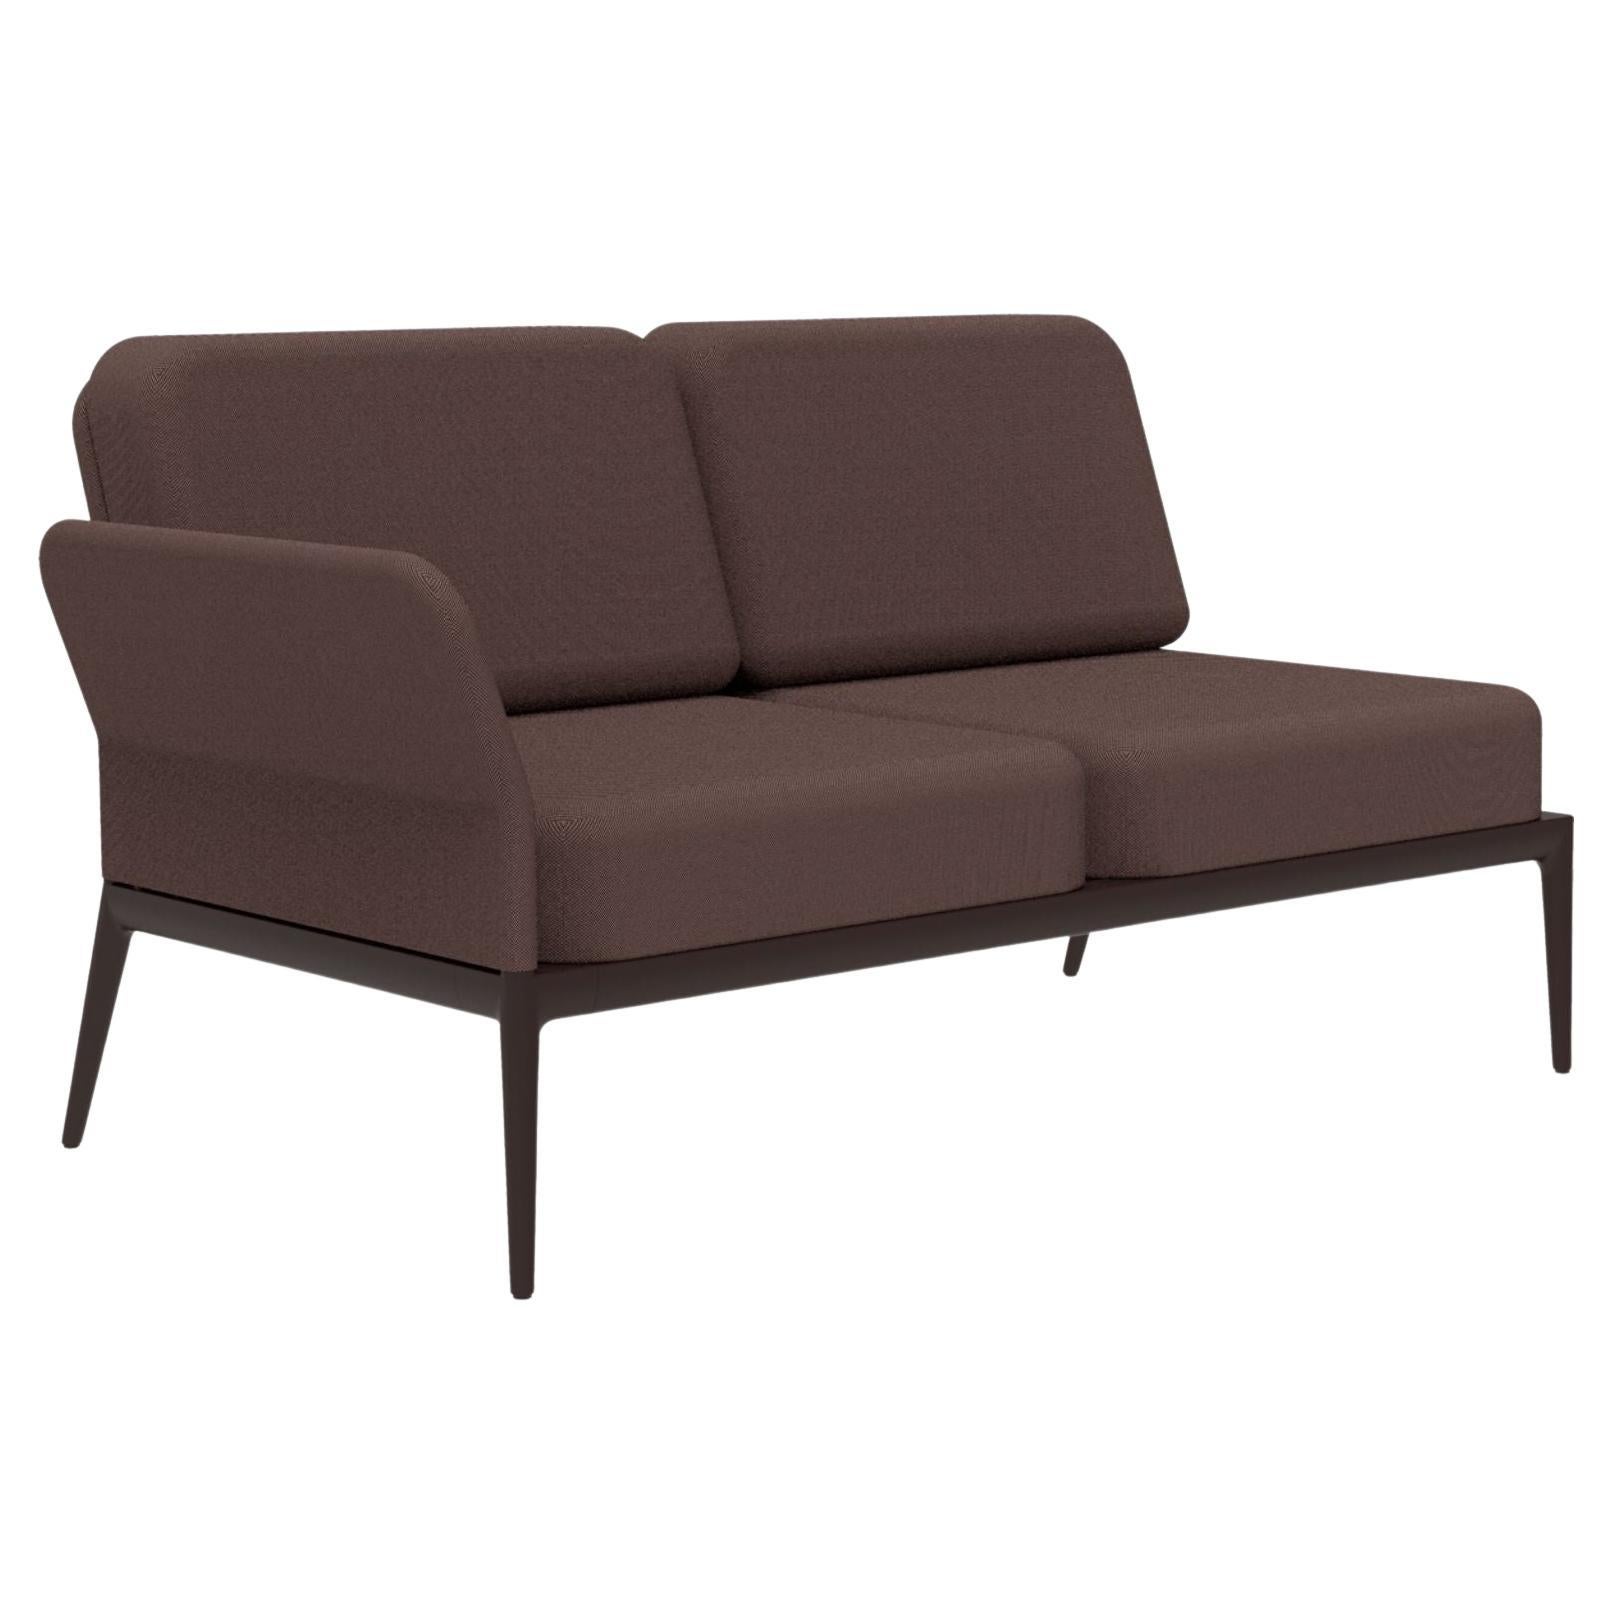 Cover Chocolate Double Right Modular Sofa by MOWEE For Sale